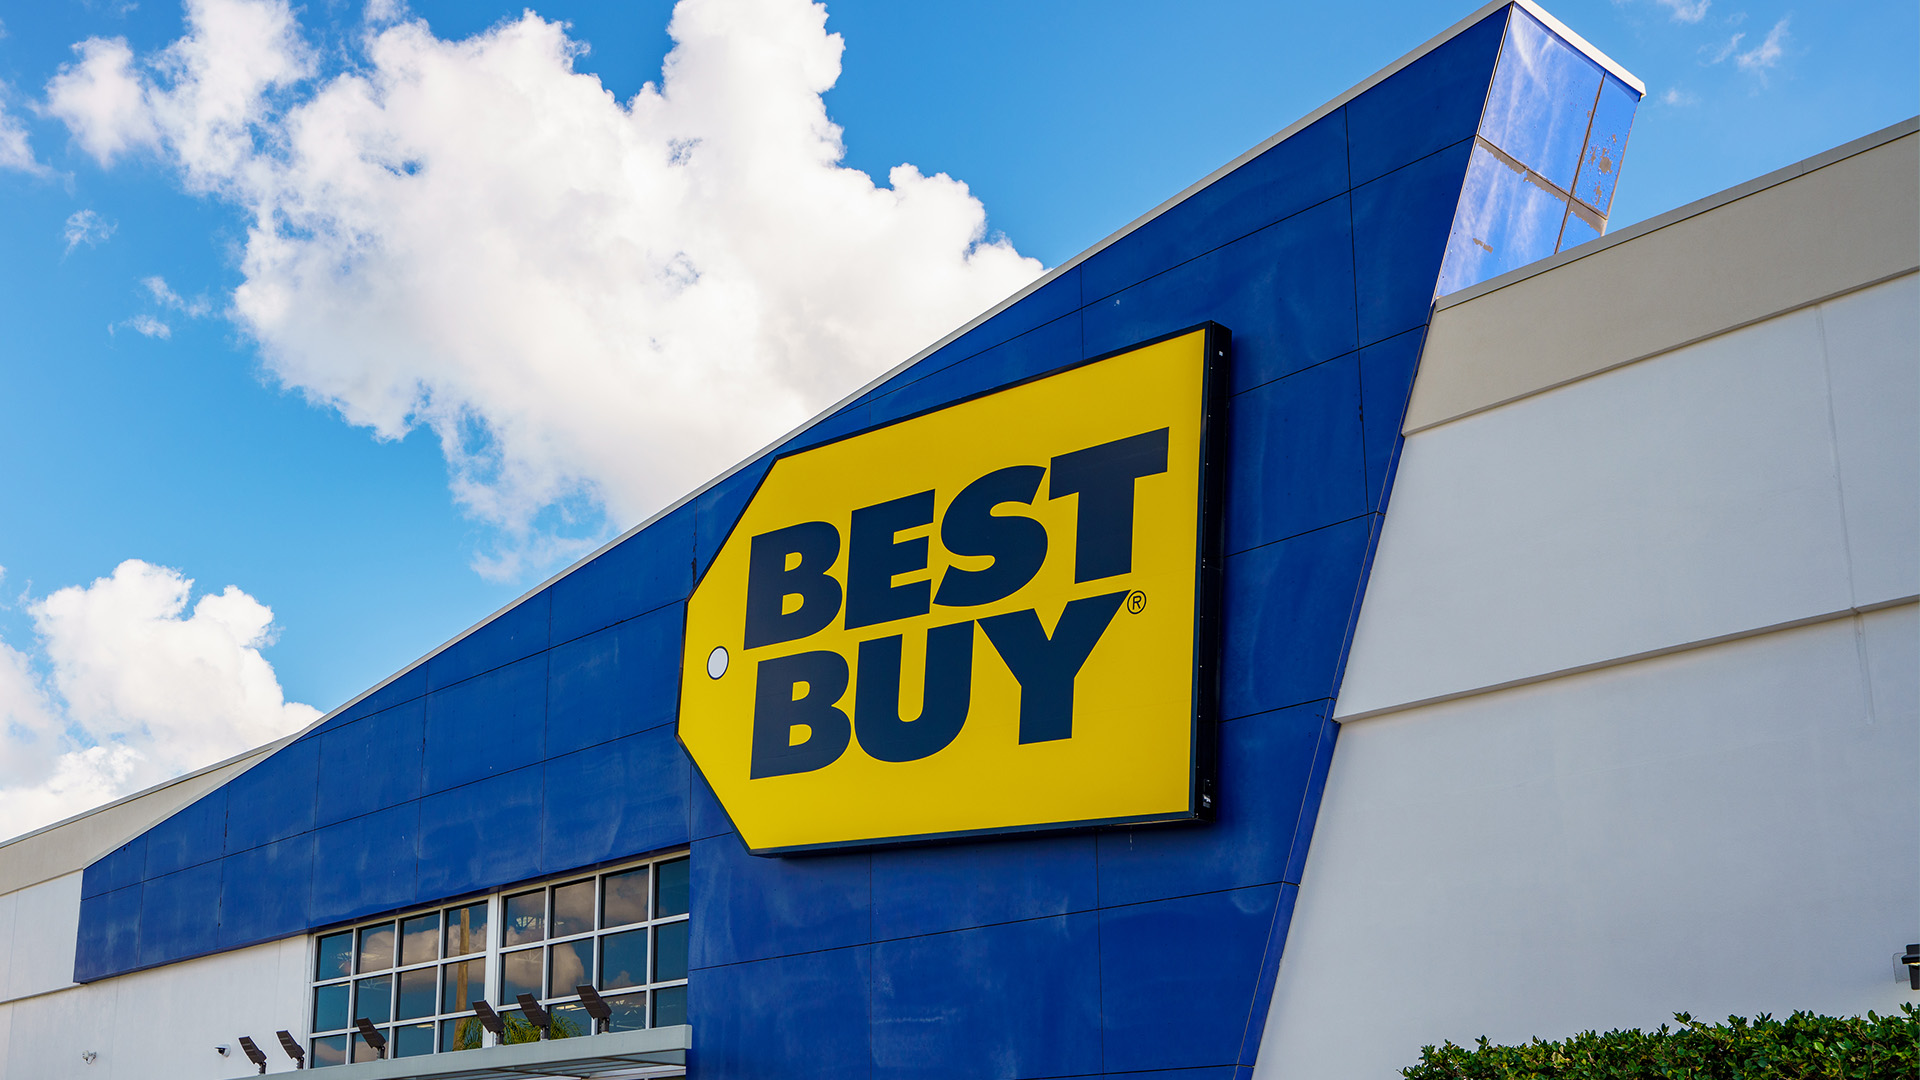 Unbeatable Deal Alert: Snag a 43-inch 4K TV for Just $179 at Best Buy – Limited Time Offer!